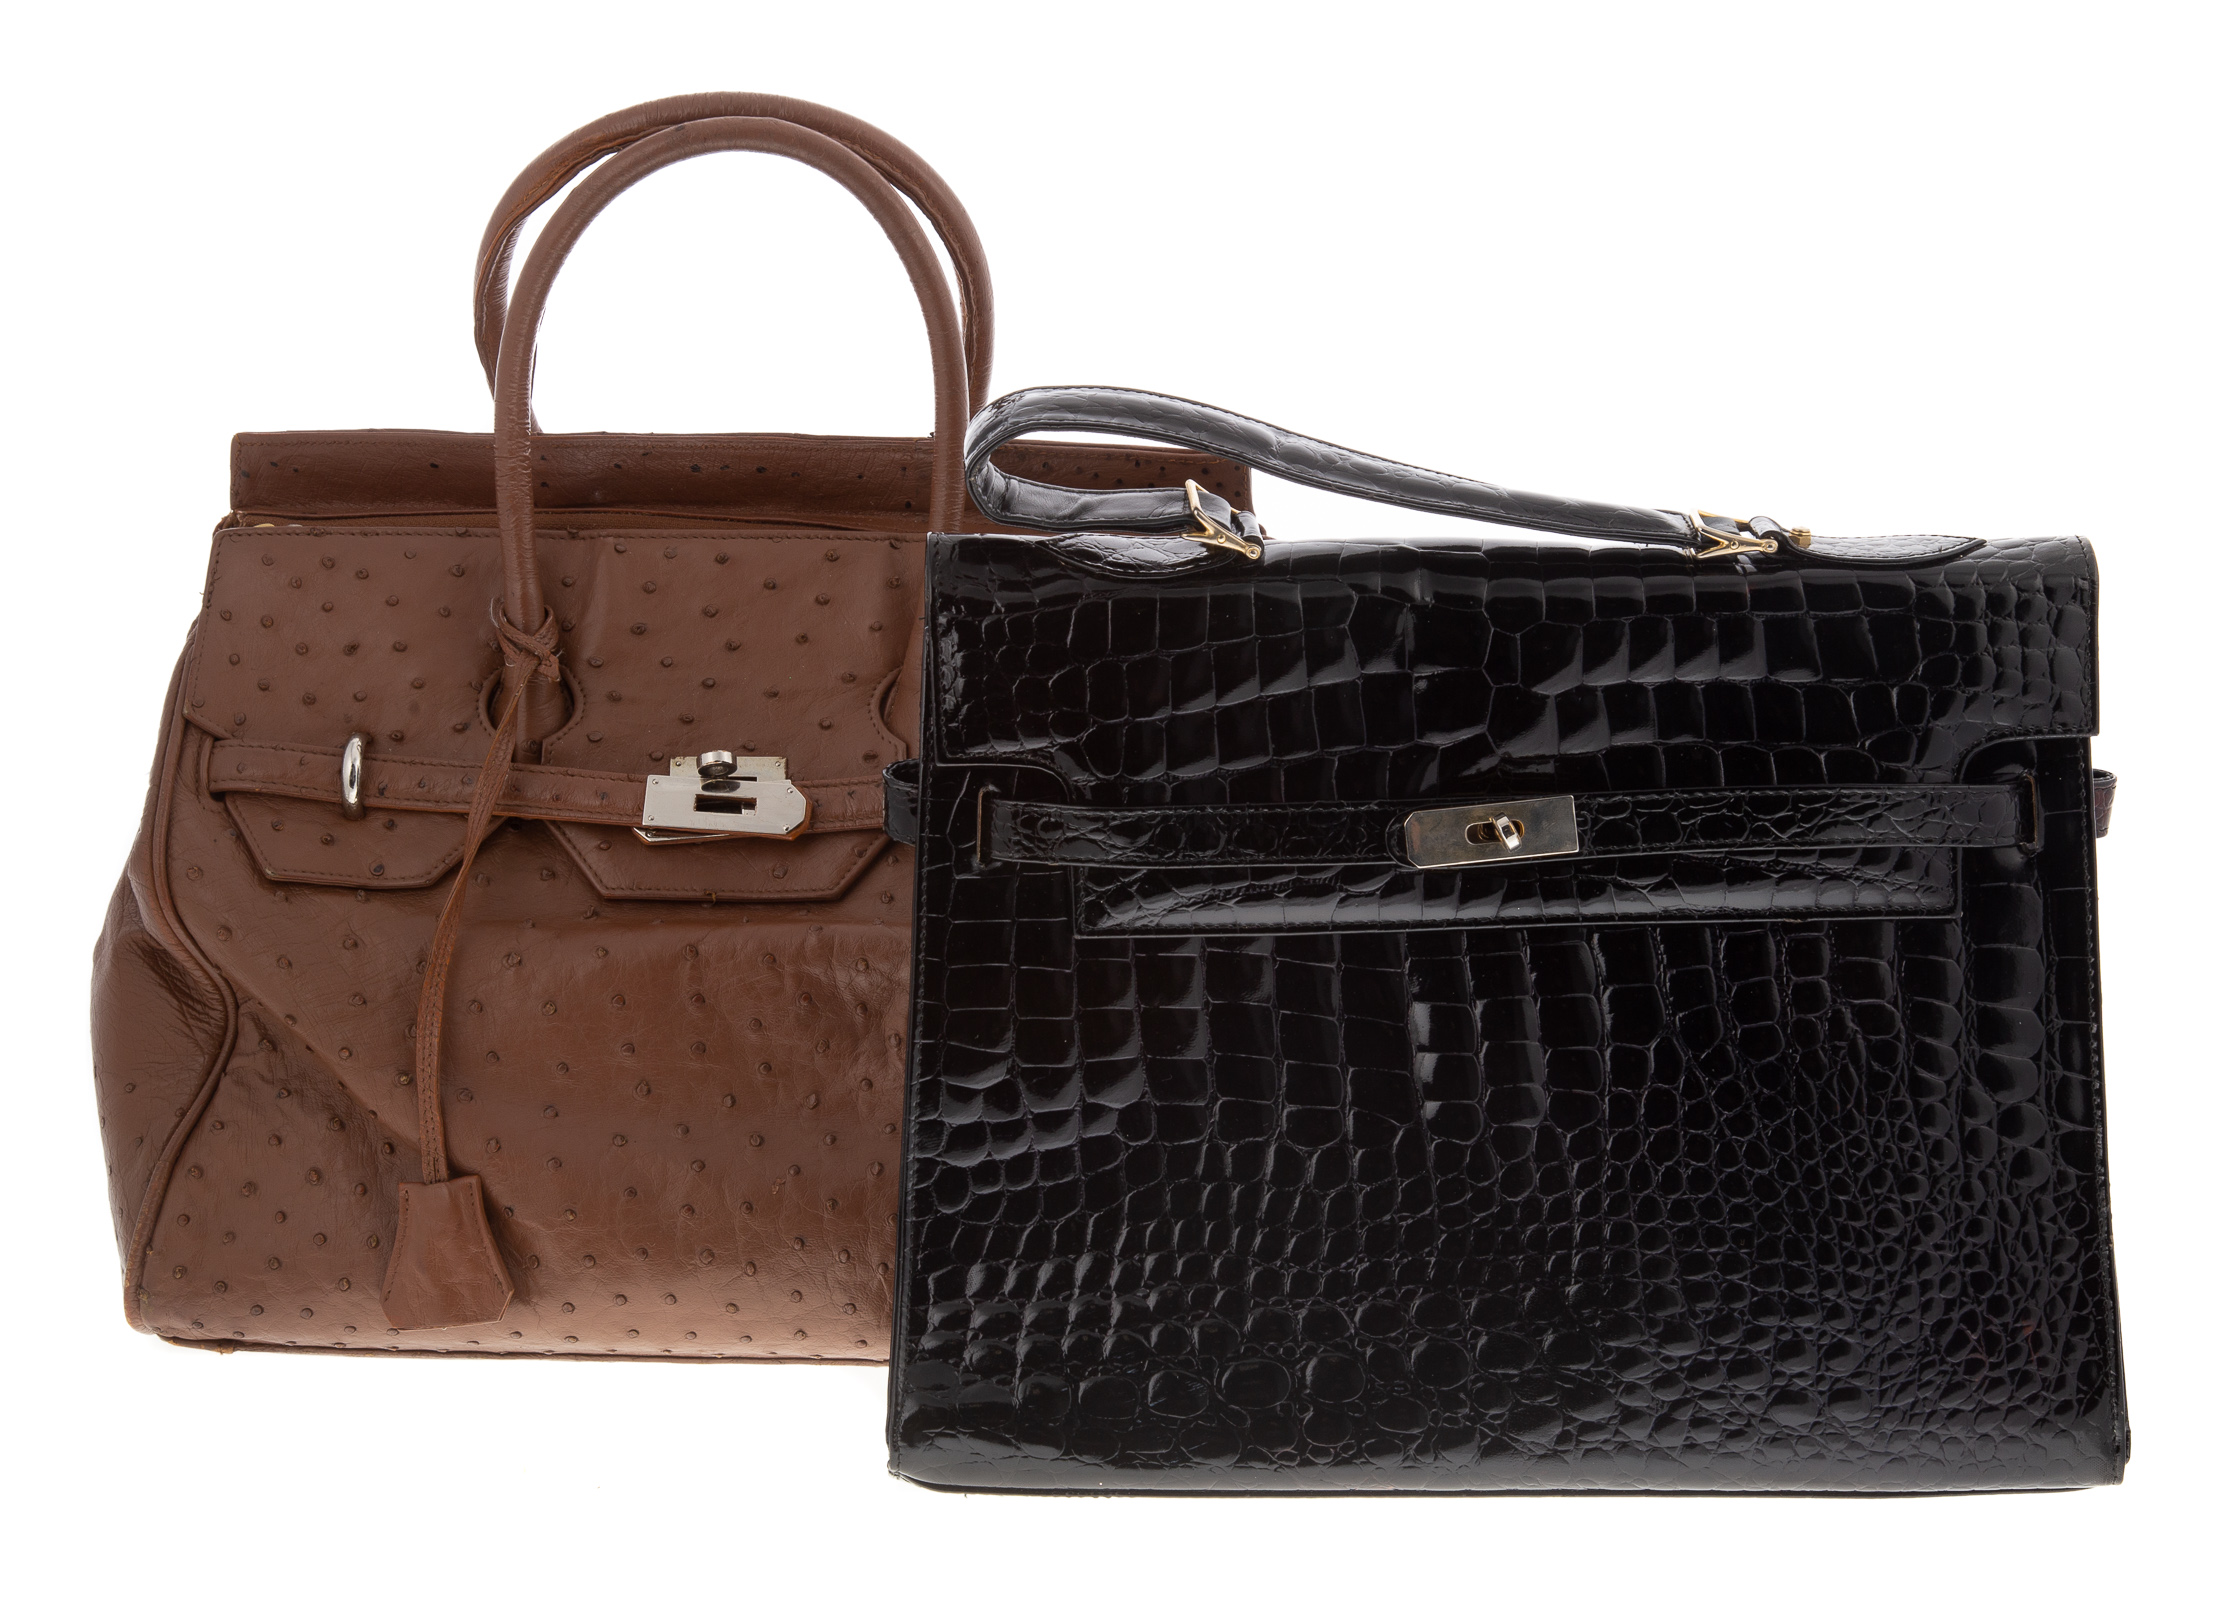 A LEATHER BIRKIN-STYLE AND A KELLY-STYLE